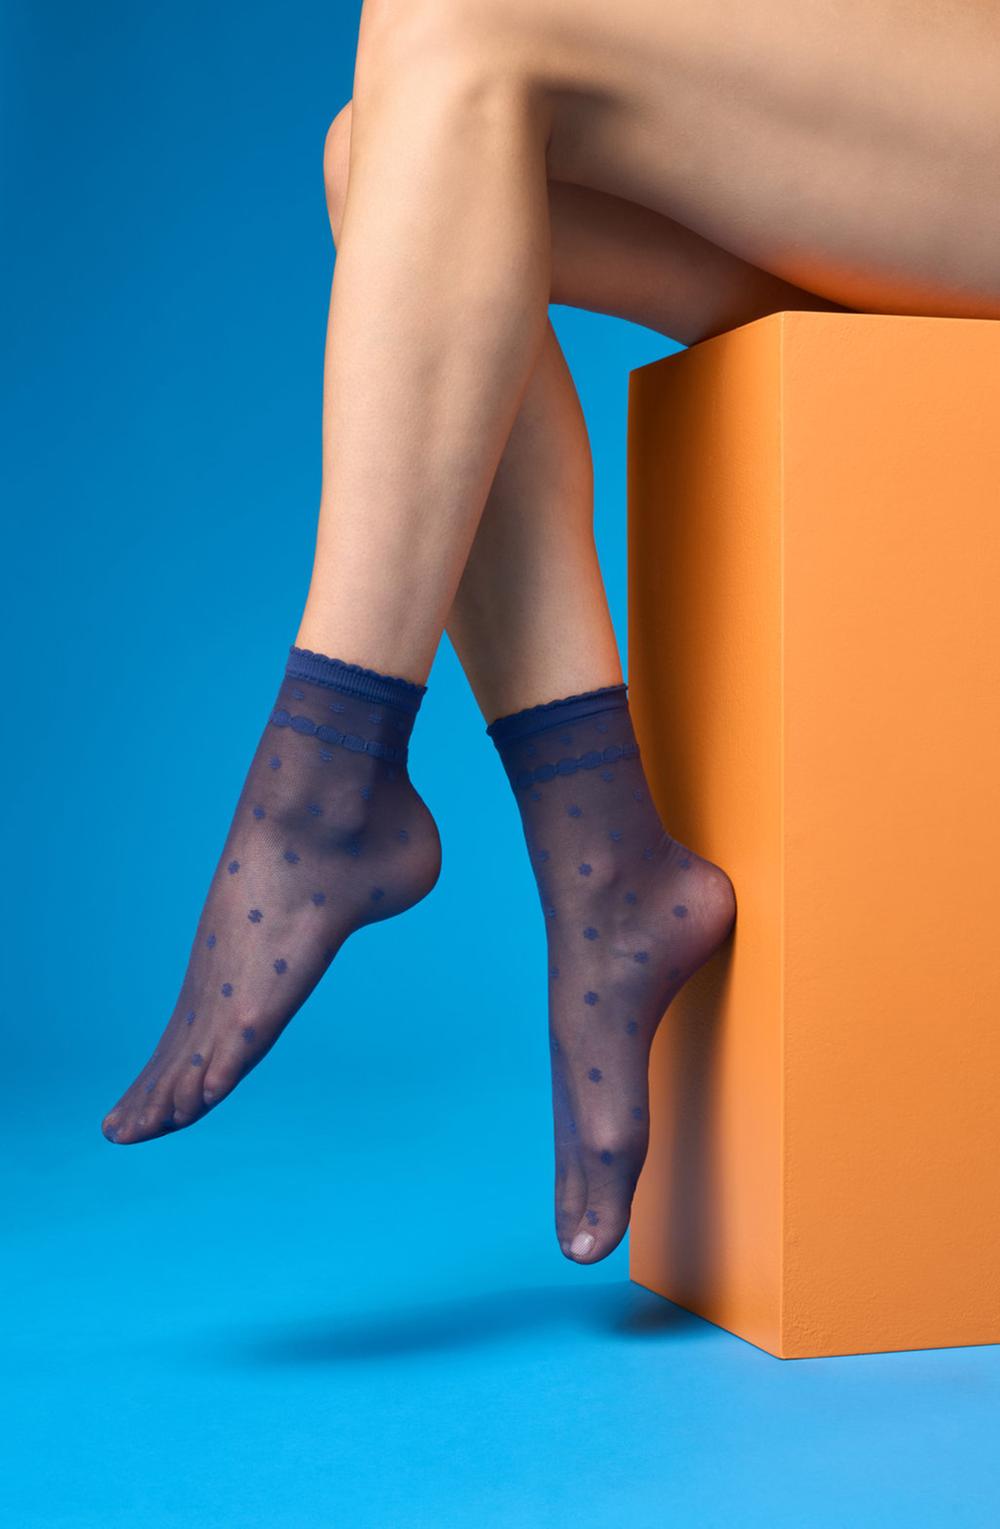 SiSi Flowers Calzino - Sheer micro mesh fashion ankle socks with a tiny flower polka dot pattern, chain style stripe around the ankle and comfort cuff with scalloped edge. Available in navy and black.